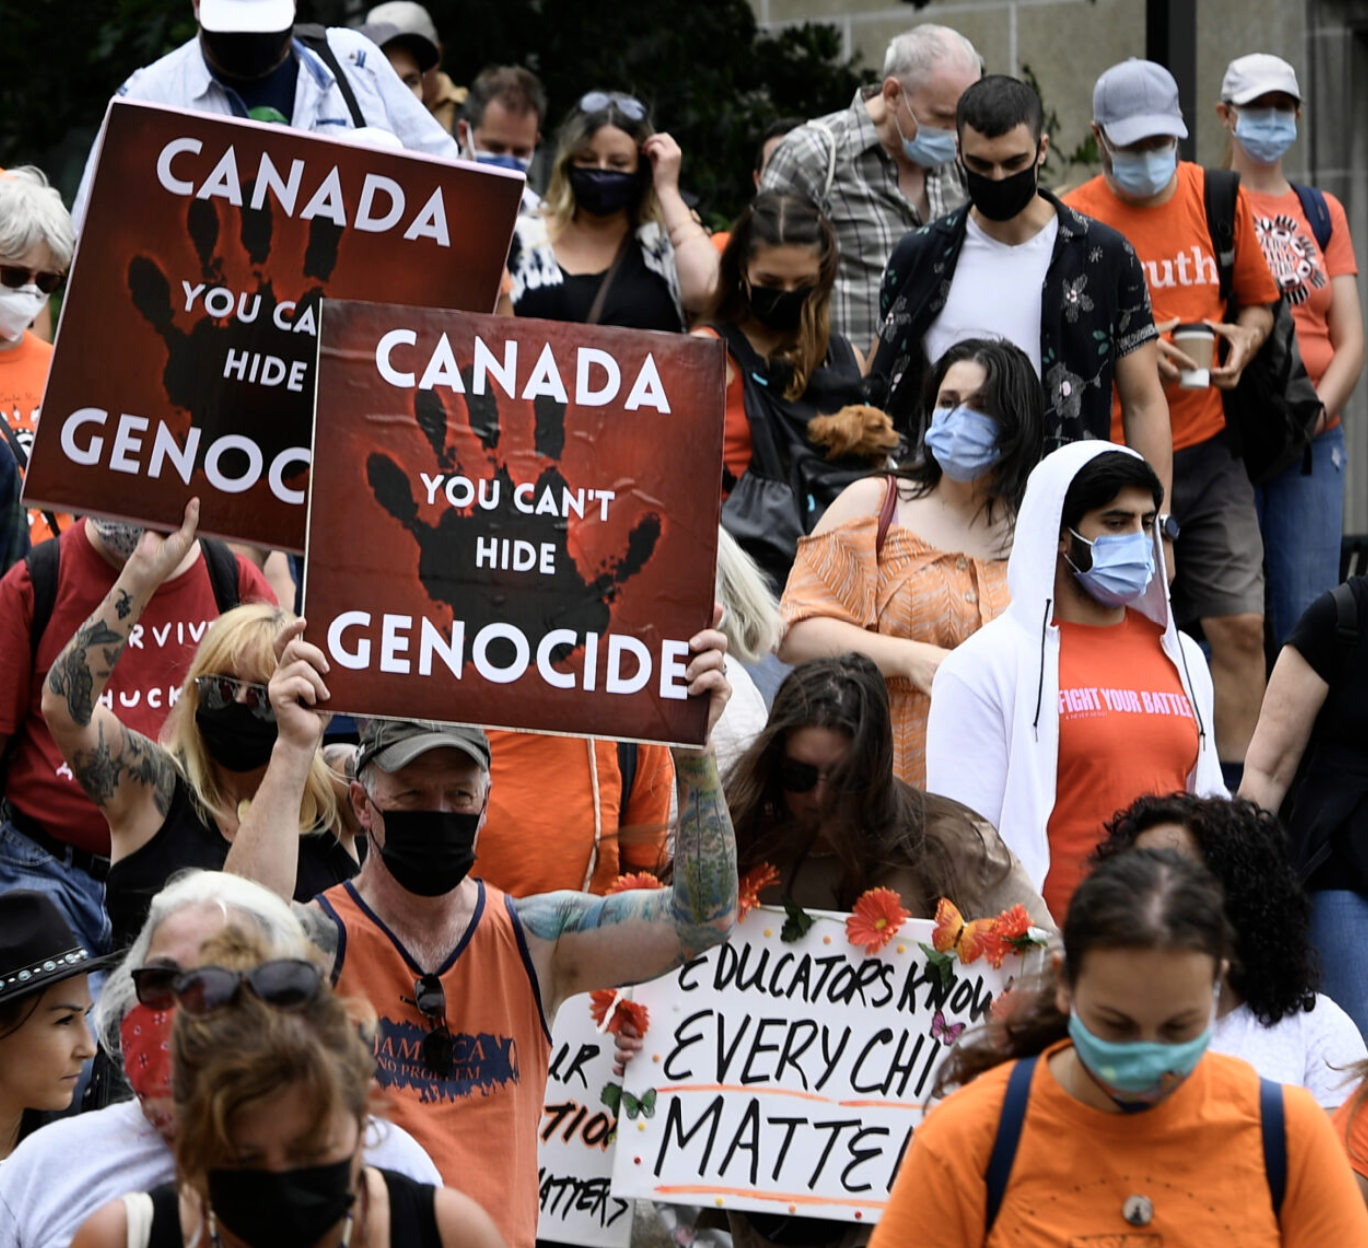 Do you agree that residential schools are a genocide?